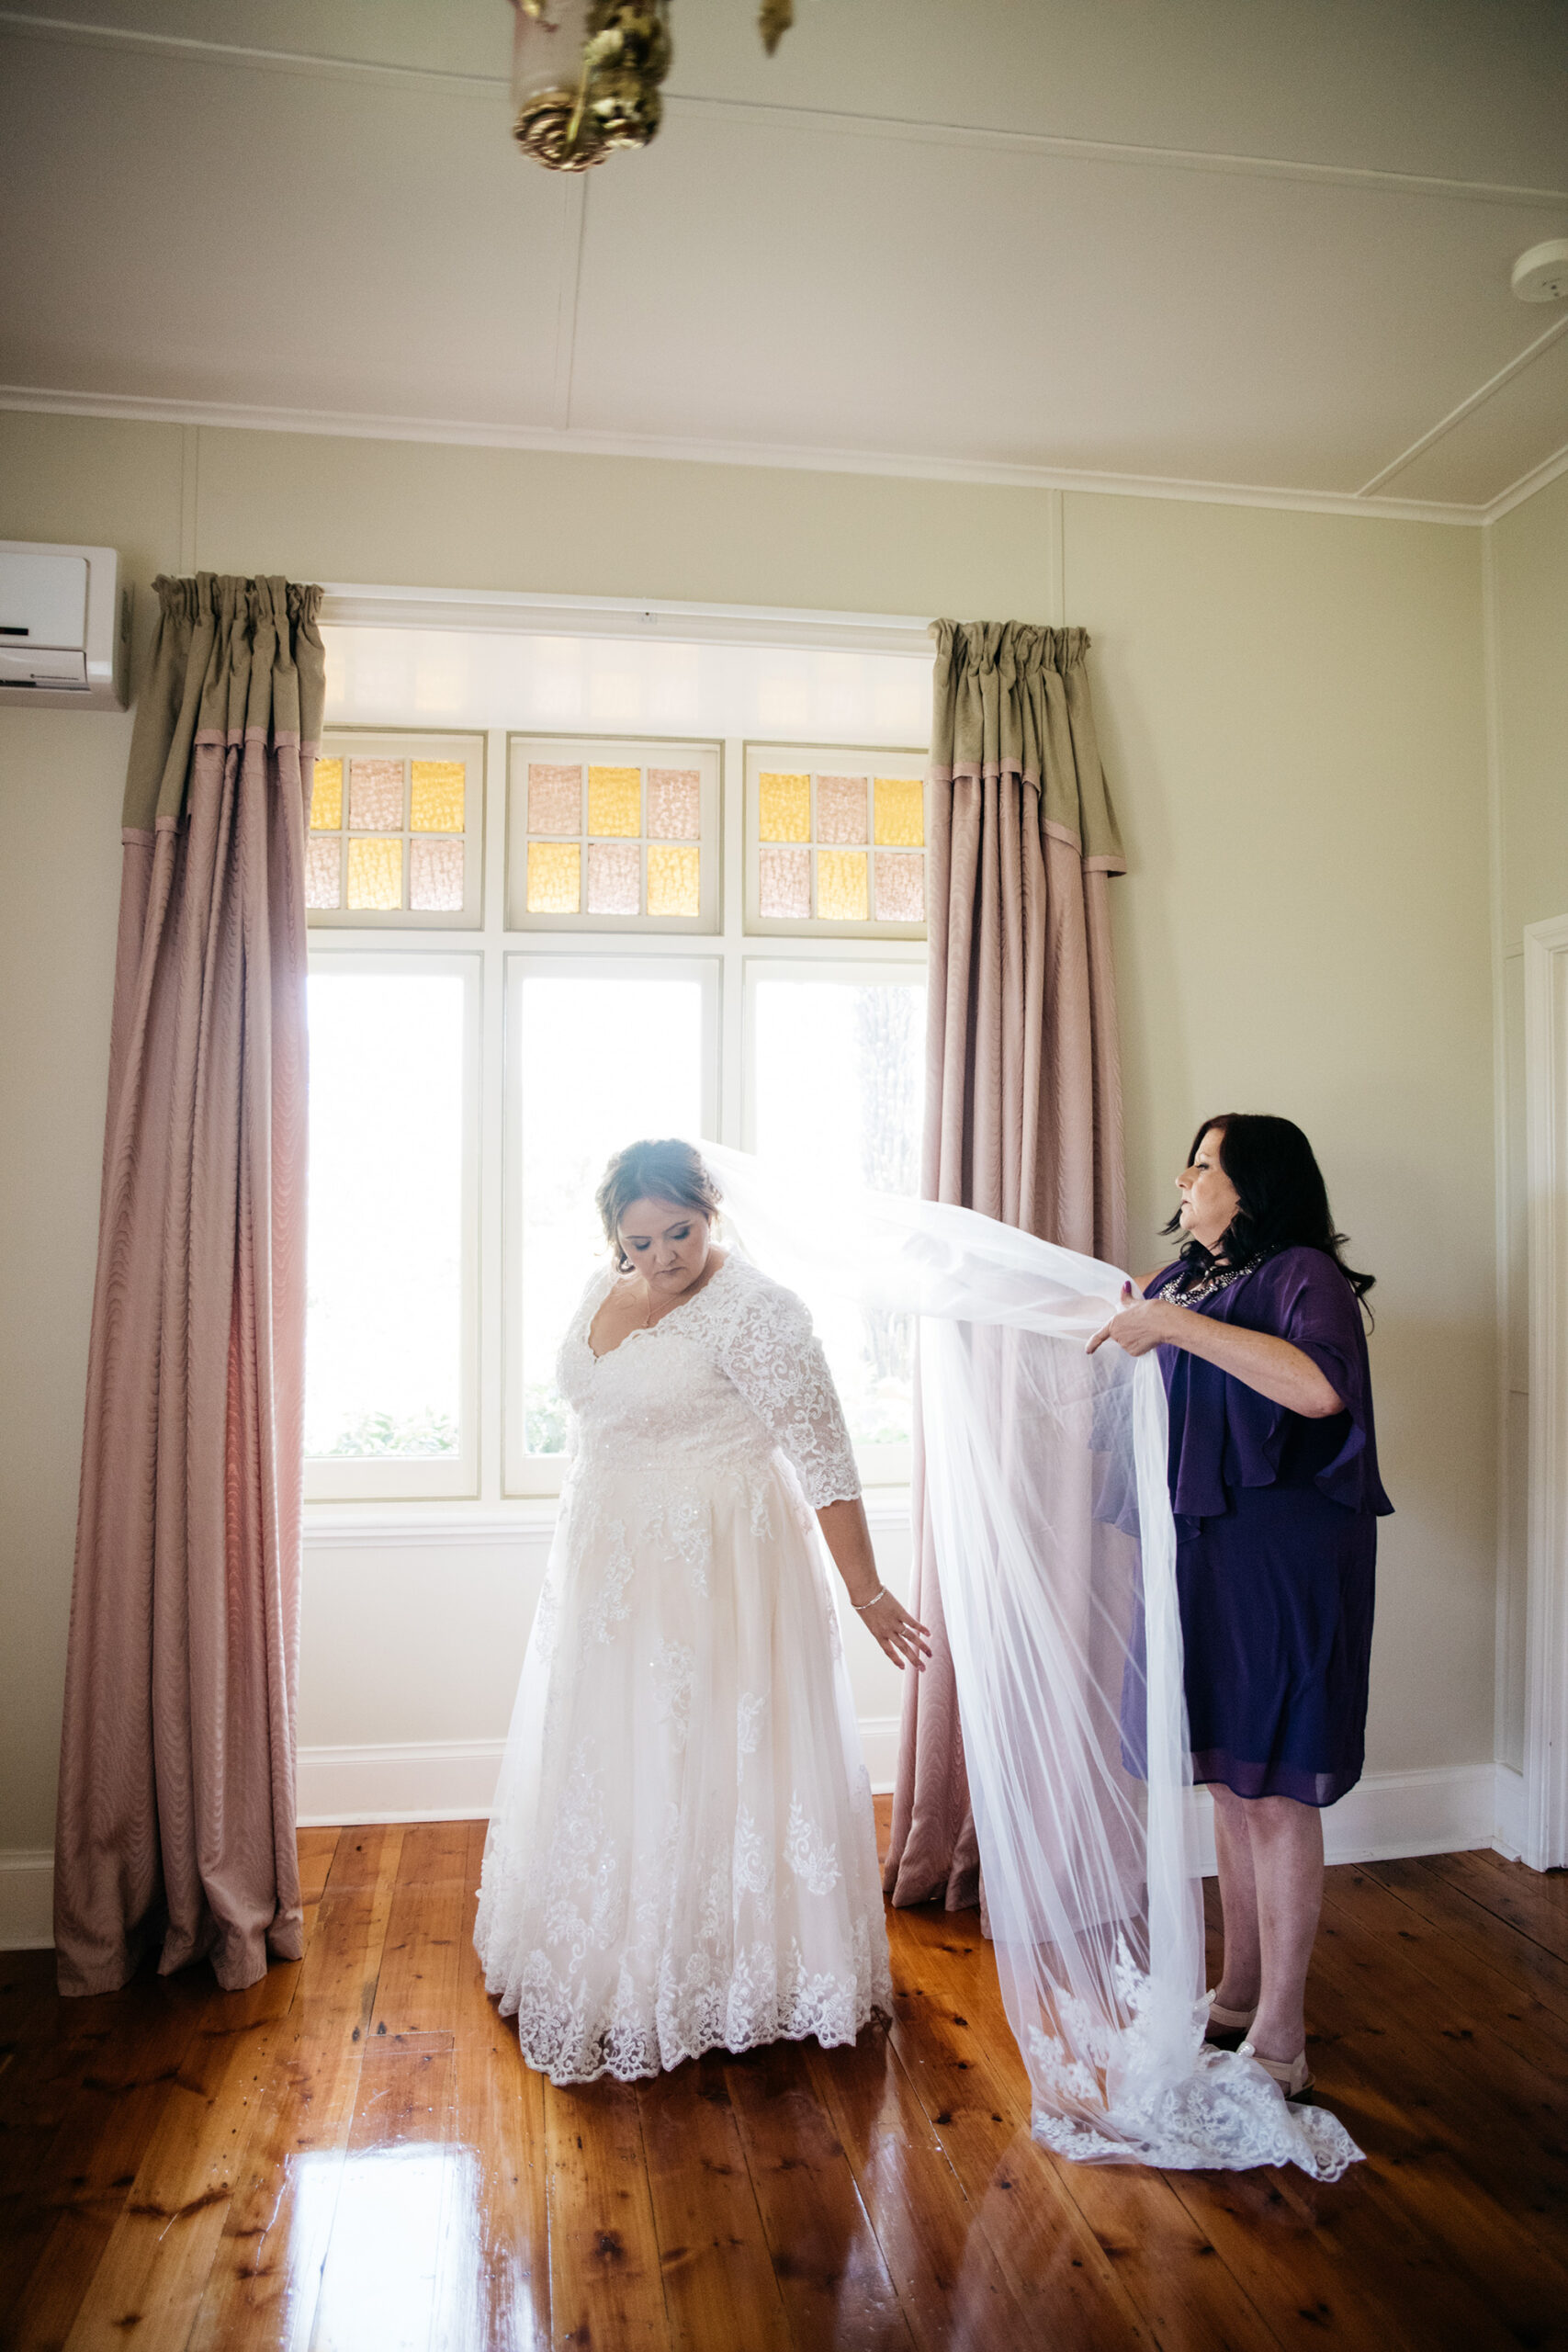 Nicole Eoin Rustic Irish Wedding Laugh Out Loud Photography SBS 015 scaled